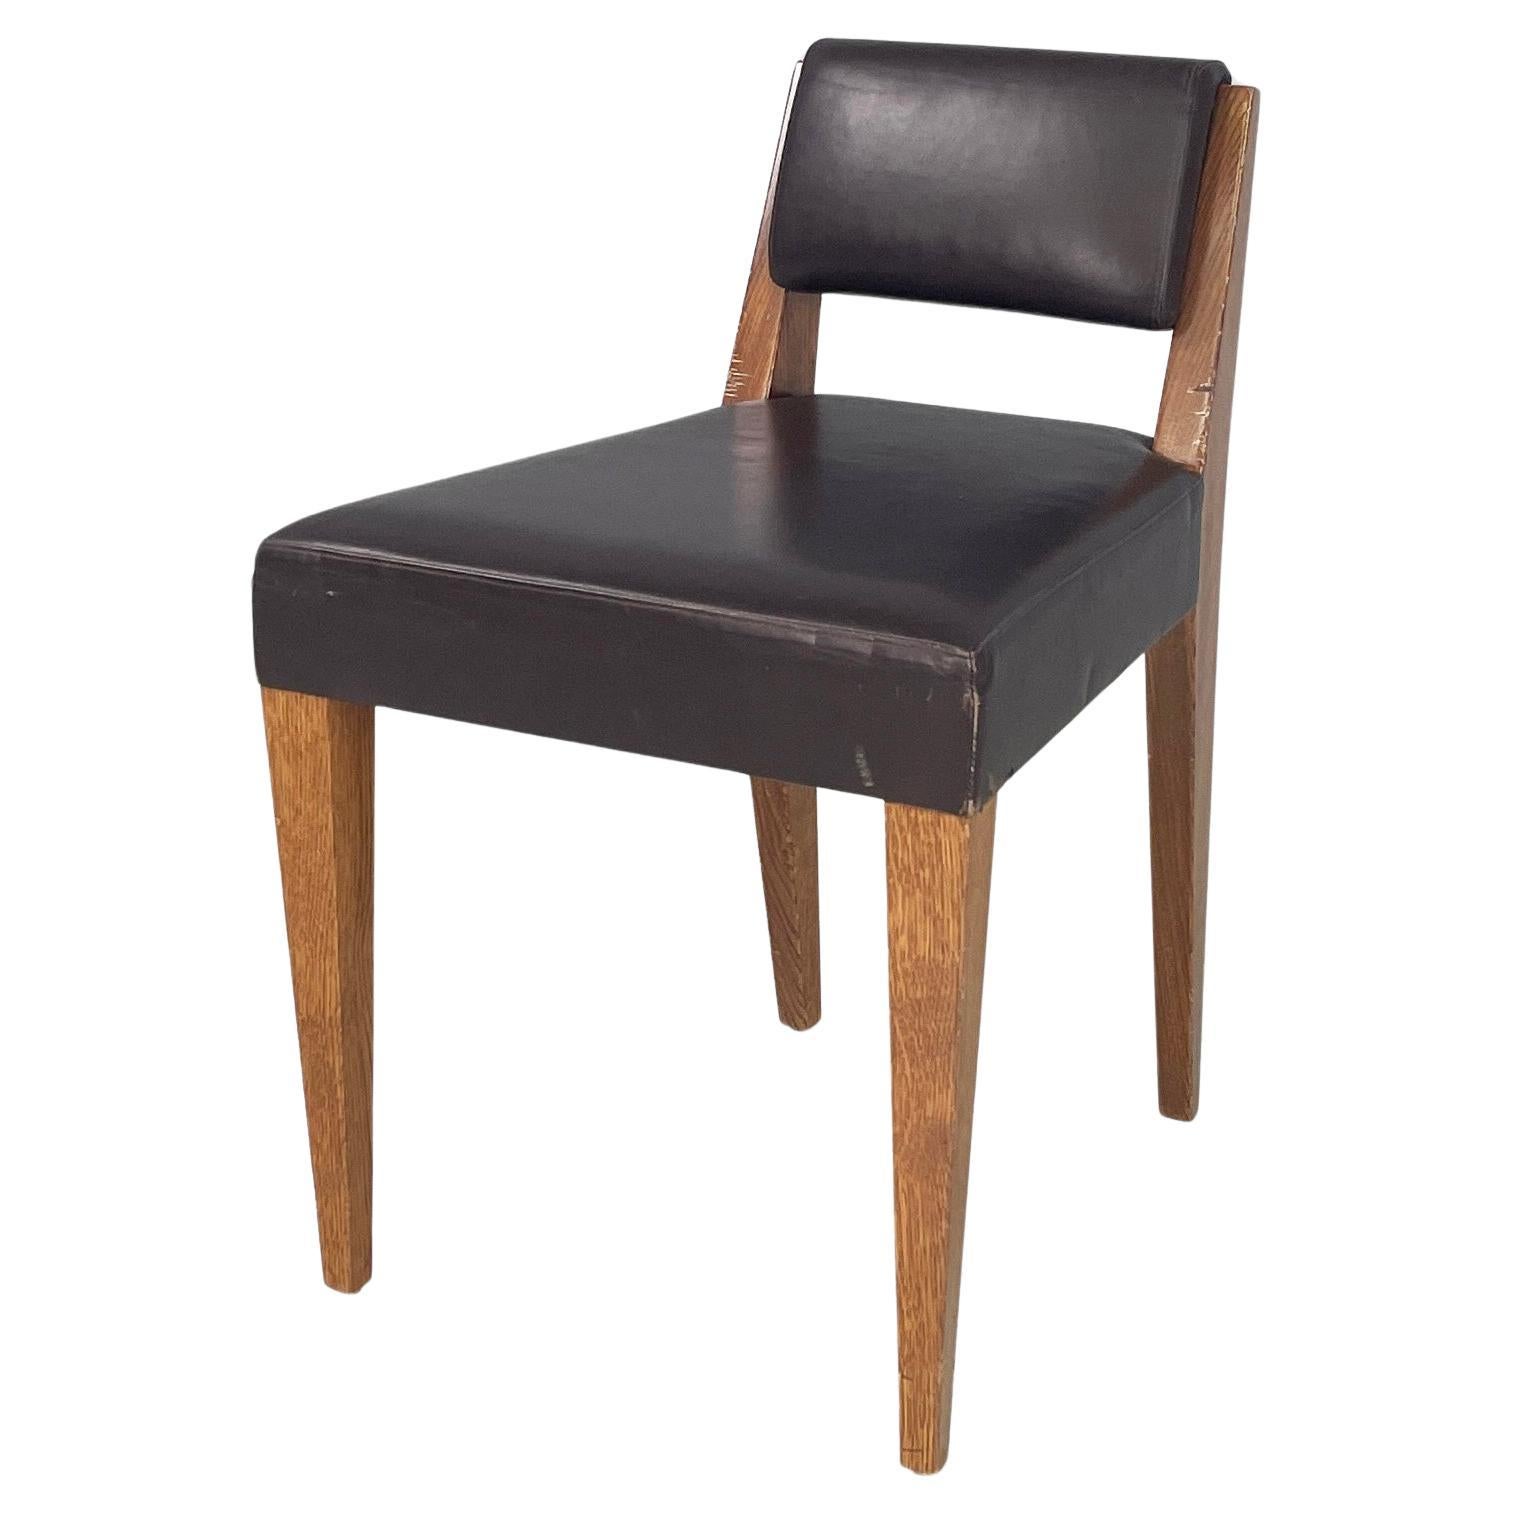 Italian modern Brown leather and wood chair by B&B, 1980s For Sale